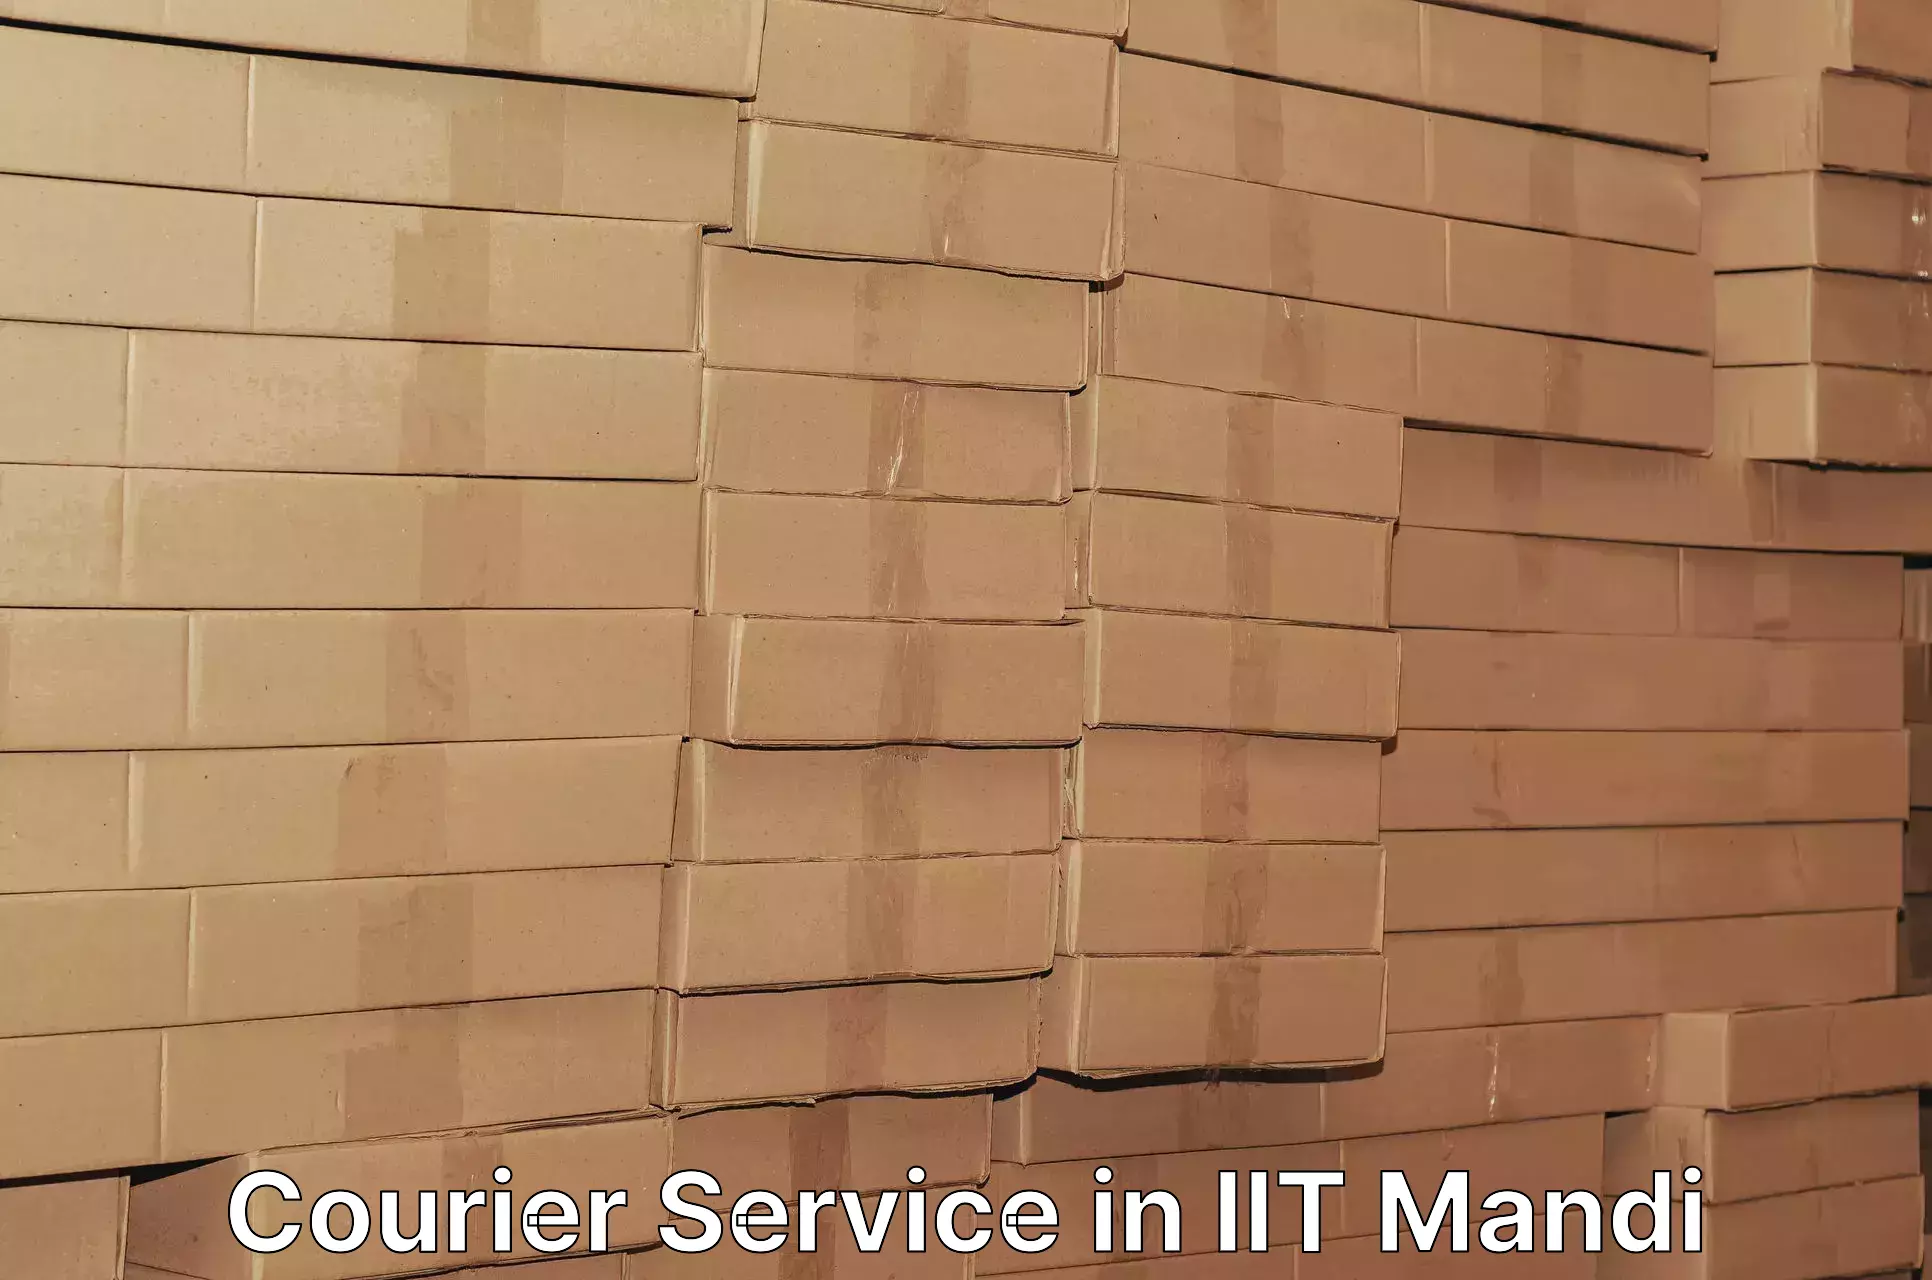 Courier service innovation in IIT Mandi